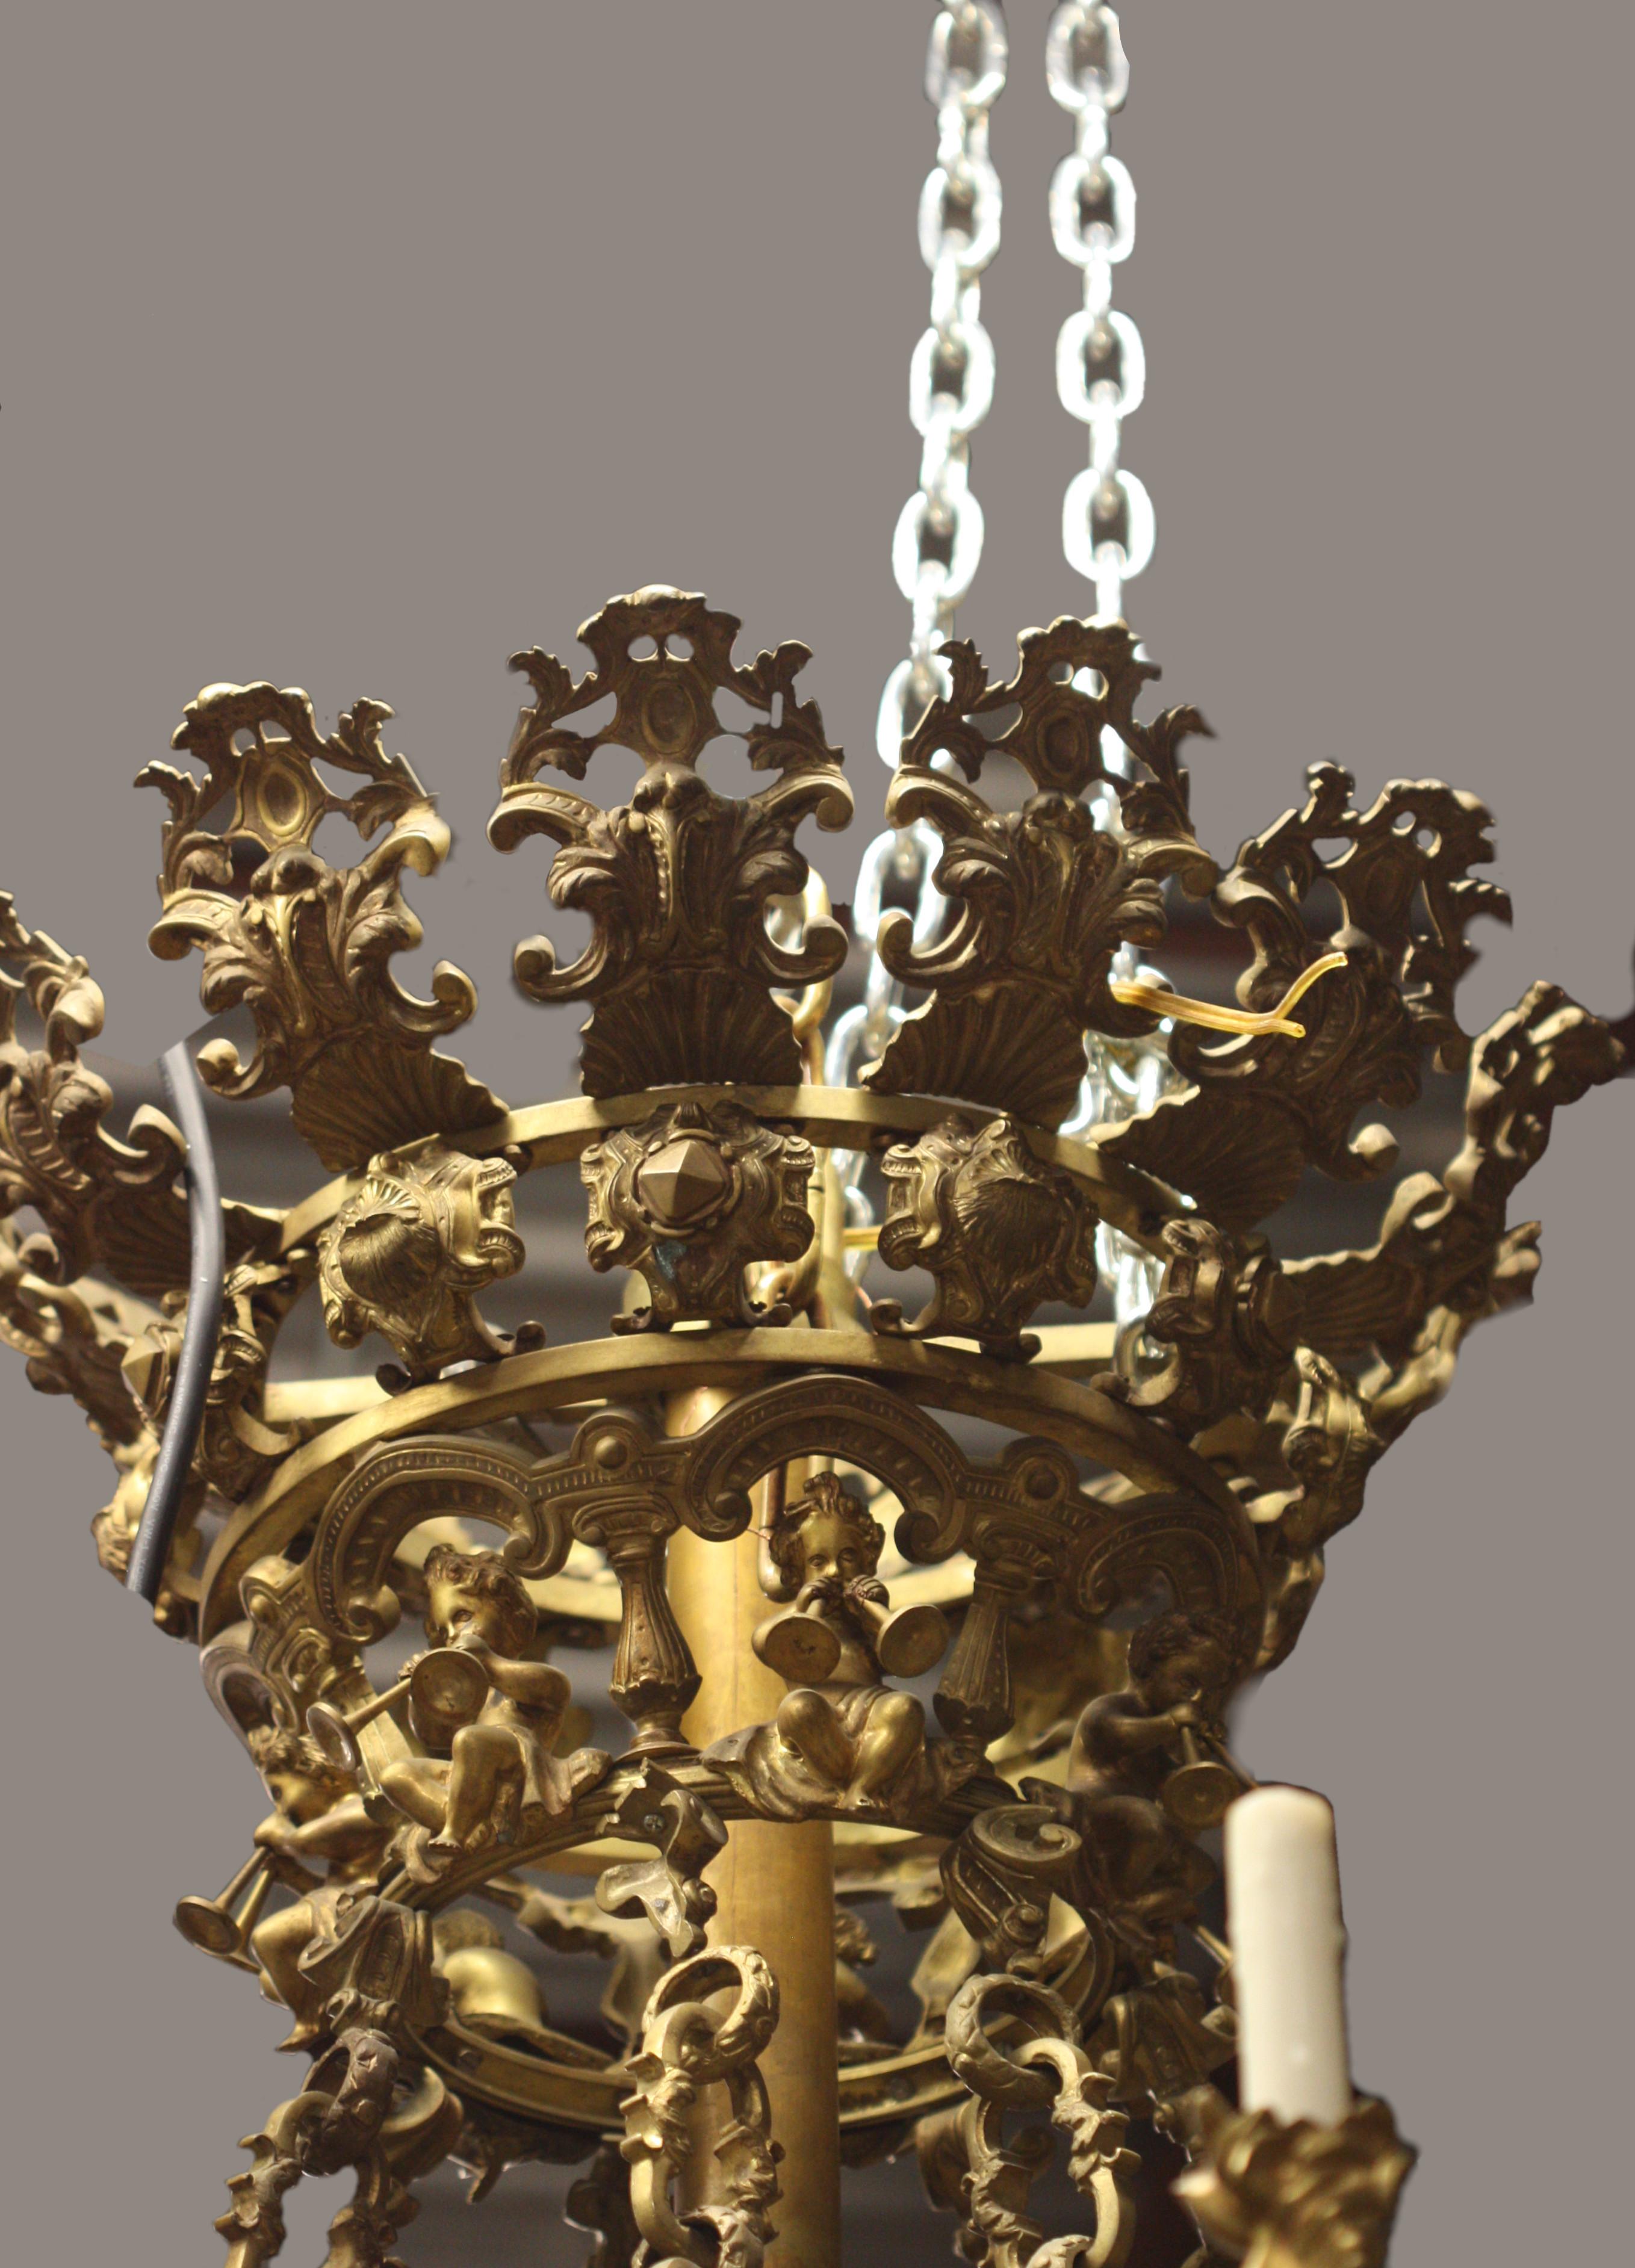 A French Belle Époque gilt bronze chandelier 
late 19th century.
The corona surmounted by stylized foliate motifs, suspending an etched glass bowl within a C-scroll pierced frame, topped with acanthus leaf finials interspersed with mermaids